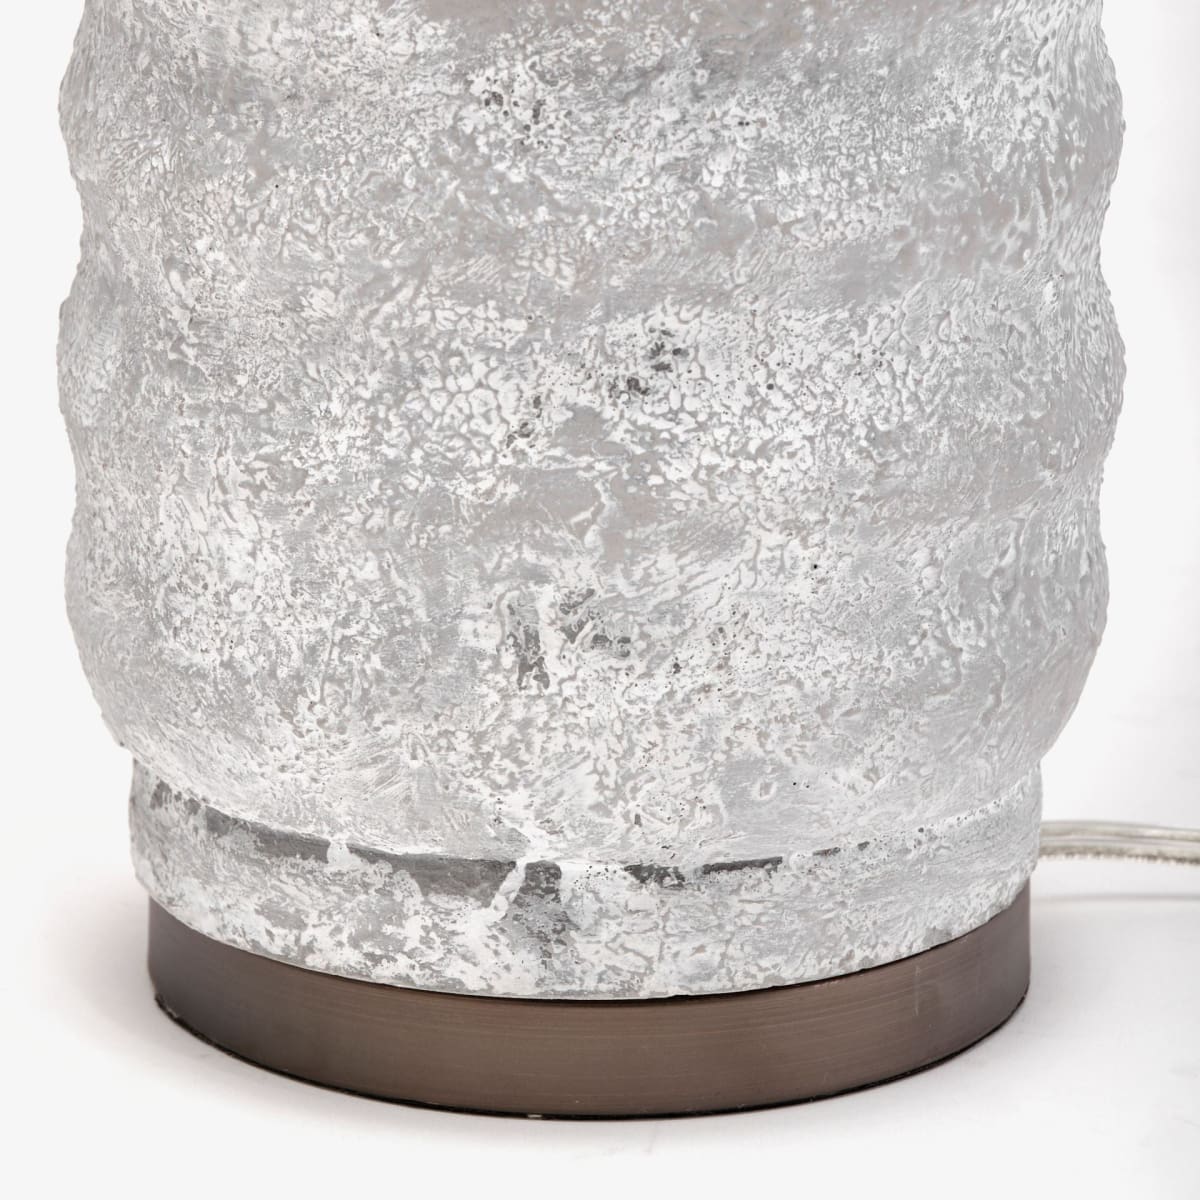 Harlan Table Lamp Gray Concrete | Beige Shade - table-lamps